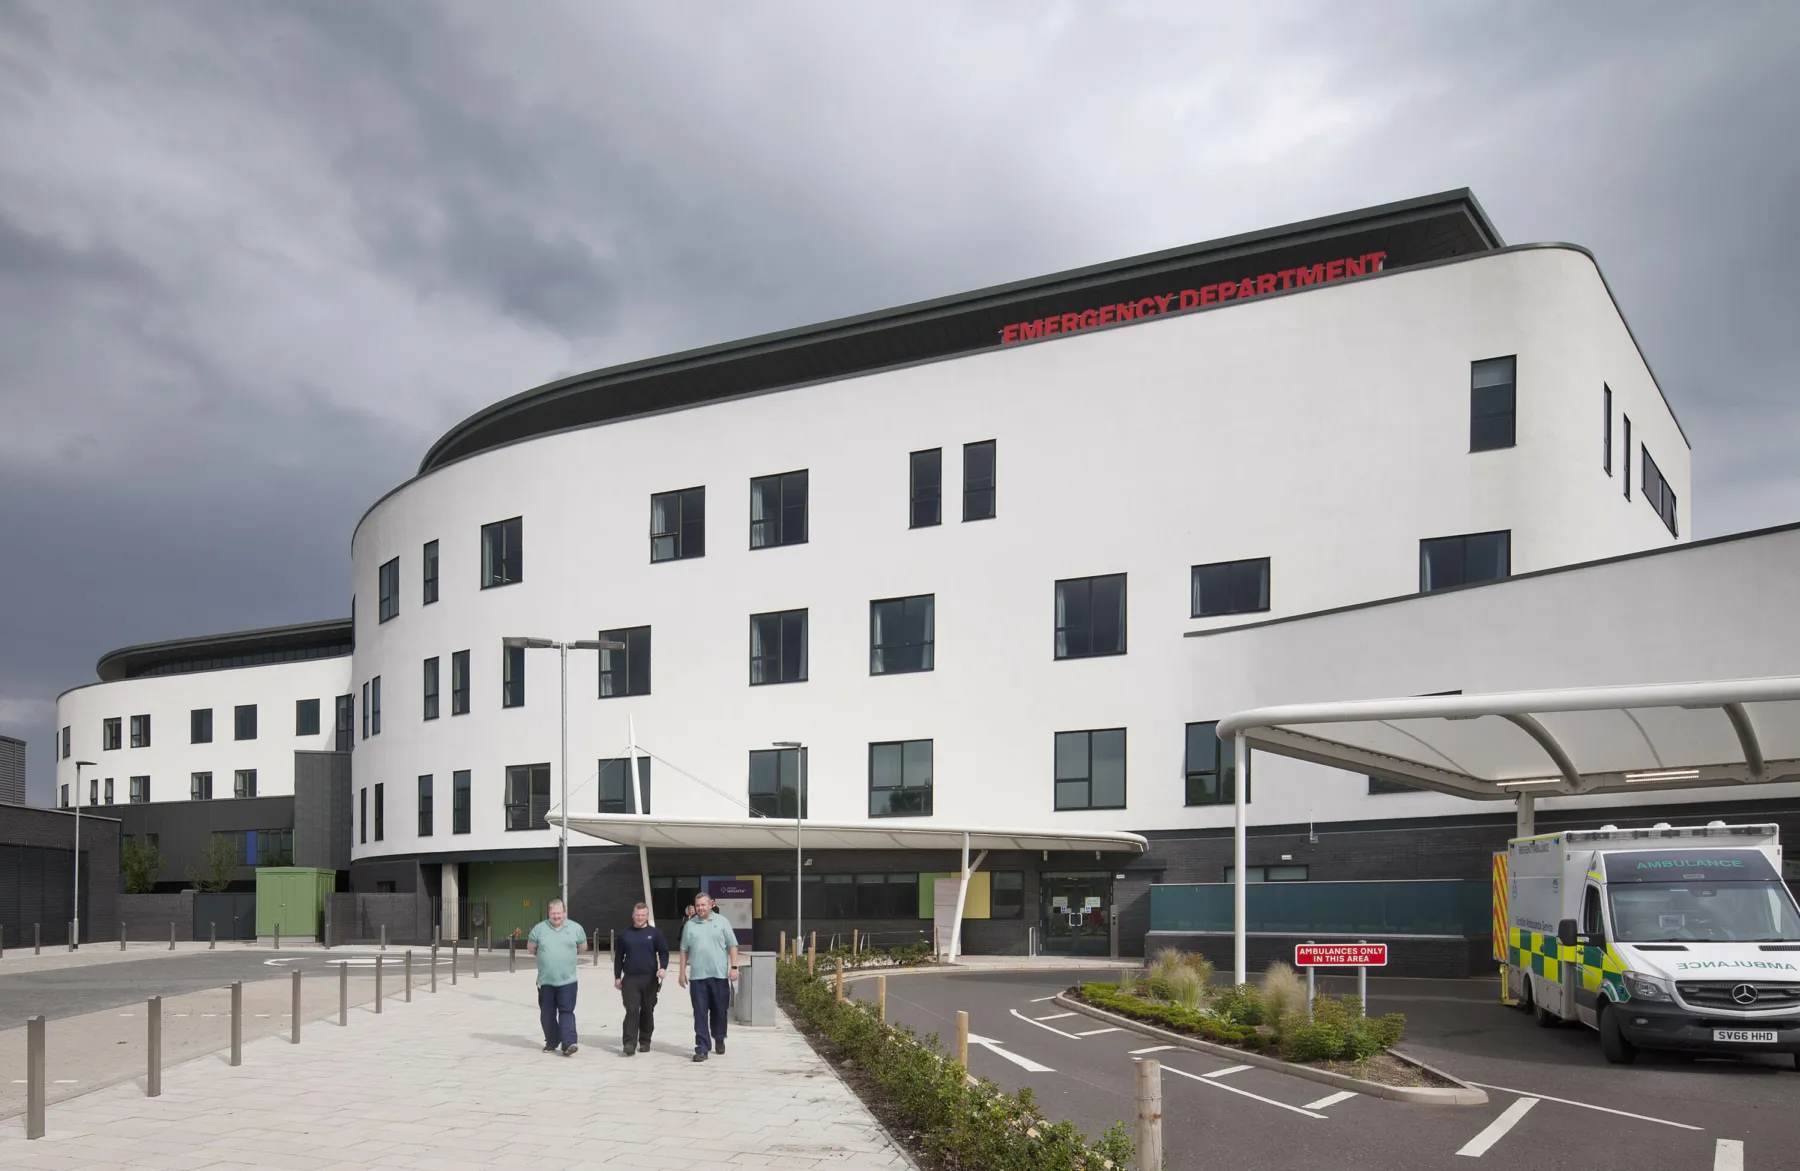 The exterior view of the Emergency Department at the Royal Hospital for Sick Children and Young People, Edinburgh. A White building with 5 storeys, curved ends and irregularly placed windows. There is a canopy above the door for admissions. Three staff members walk towards the camera.